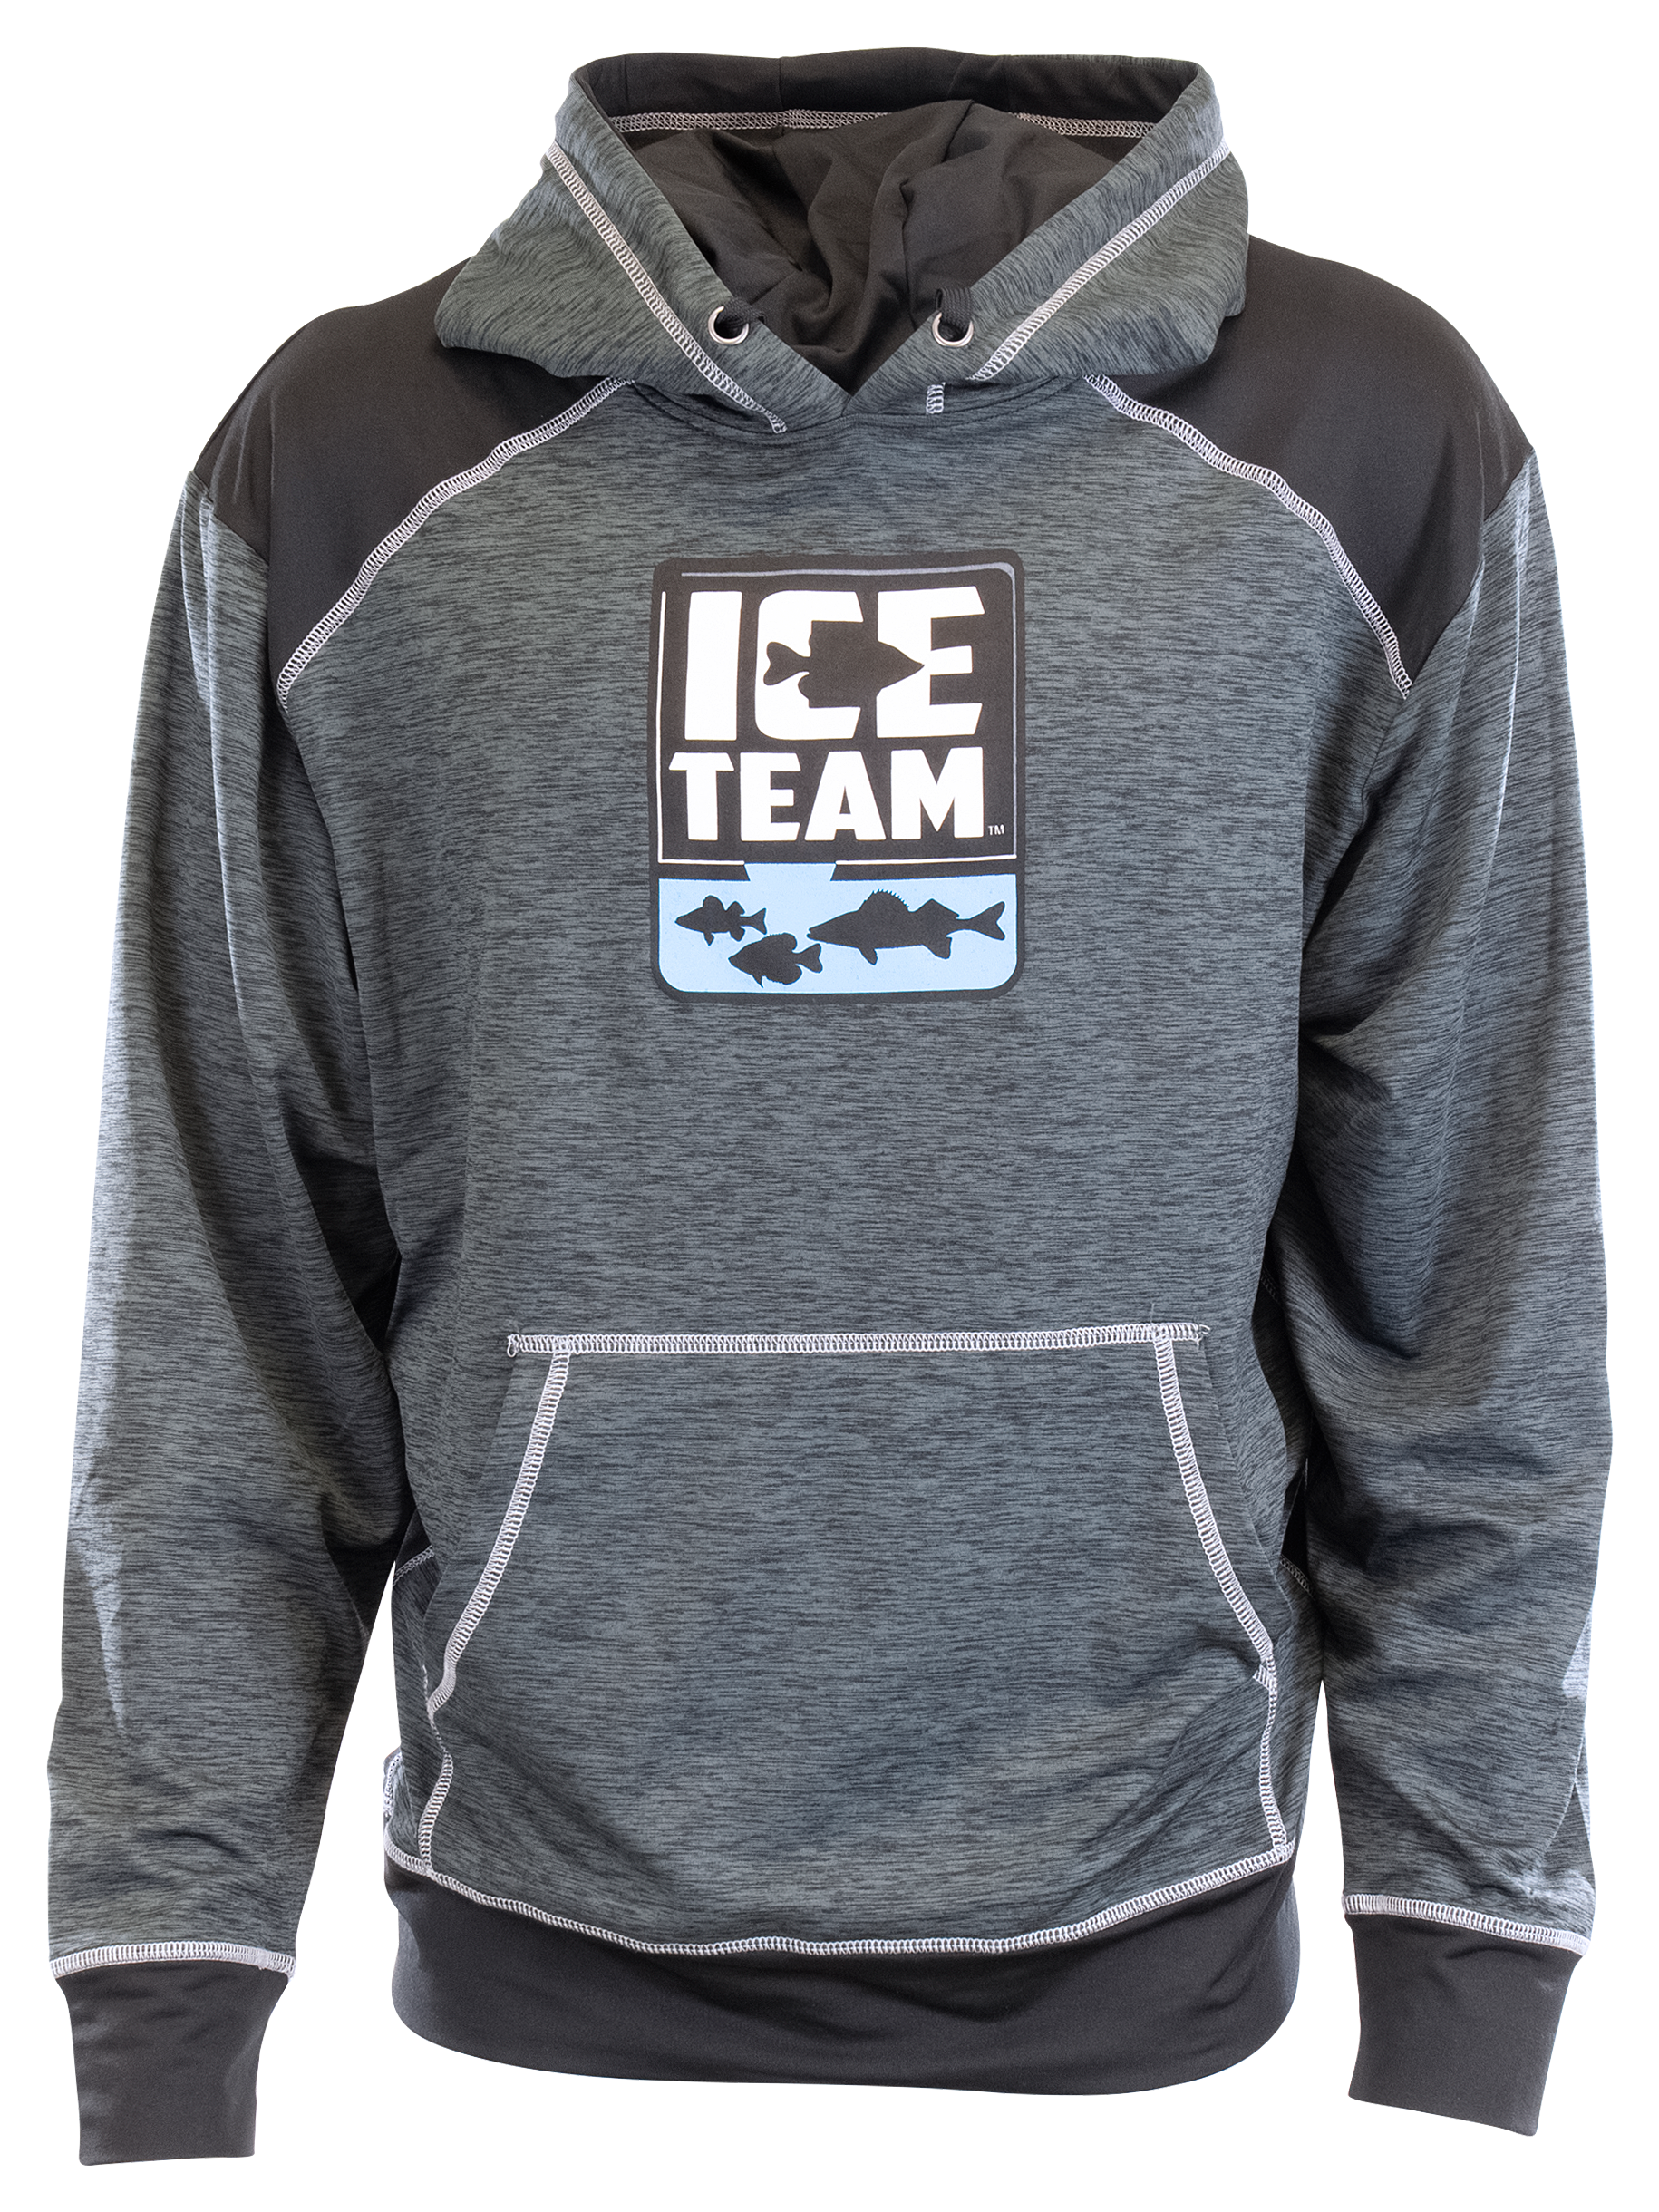 NEW Clam Performance Brushed Fleece Ice Fishing Pullover Hoodie Size Medium